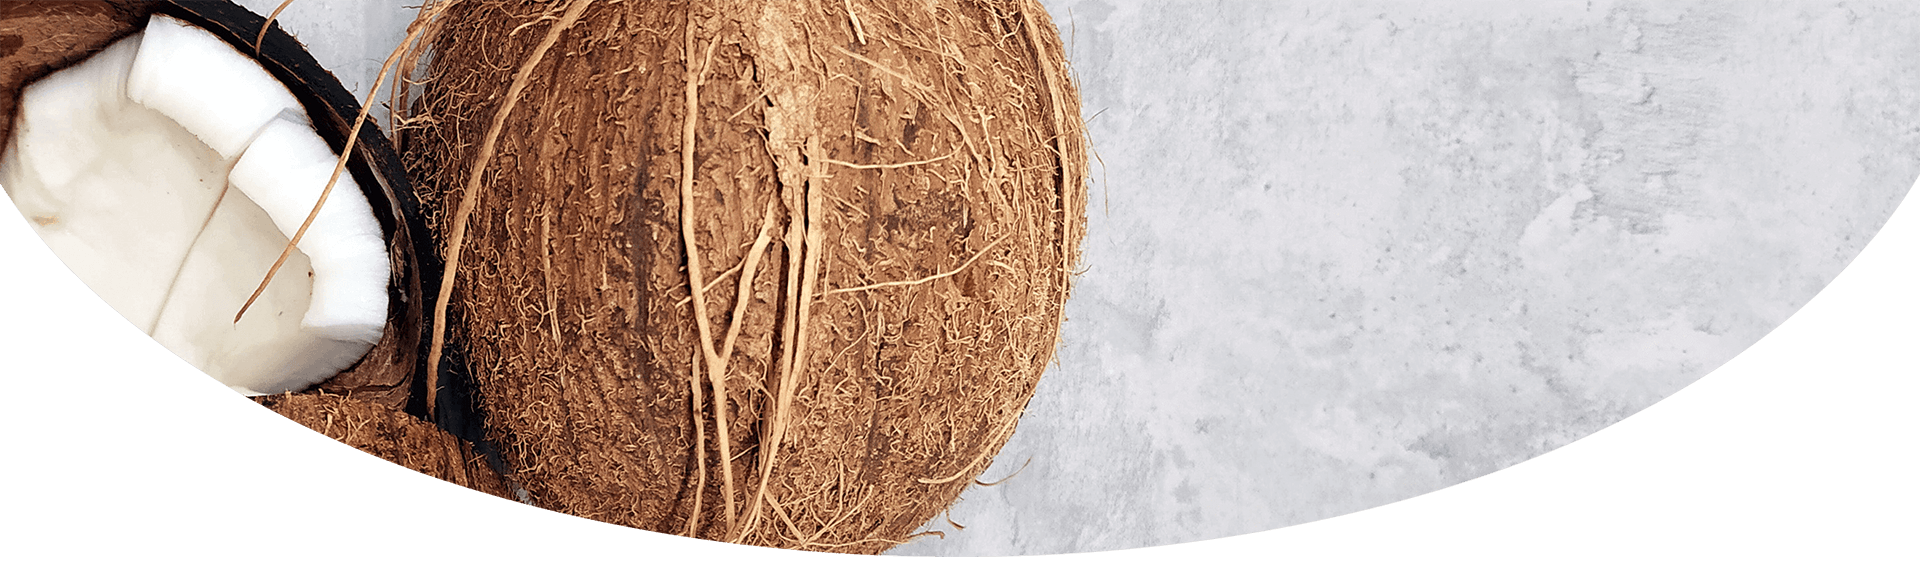 A close-up image featuring a whole coconut, a few coconut pieces, and a jar of coconut oil on a textured white surface, highlighting the fibrous brown exterior and the white flesh inside.